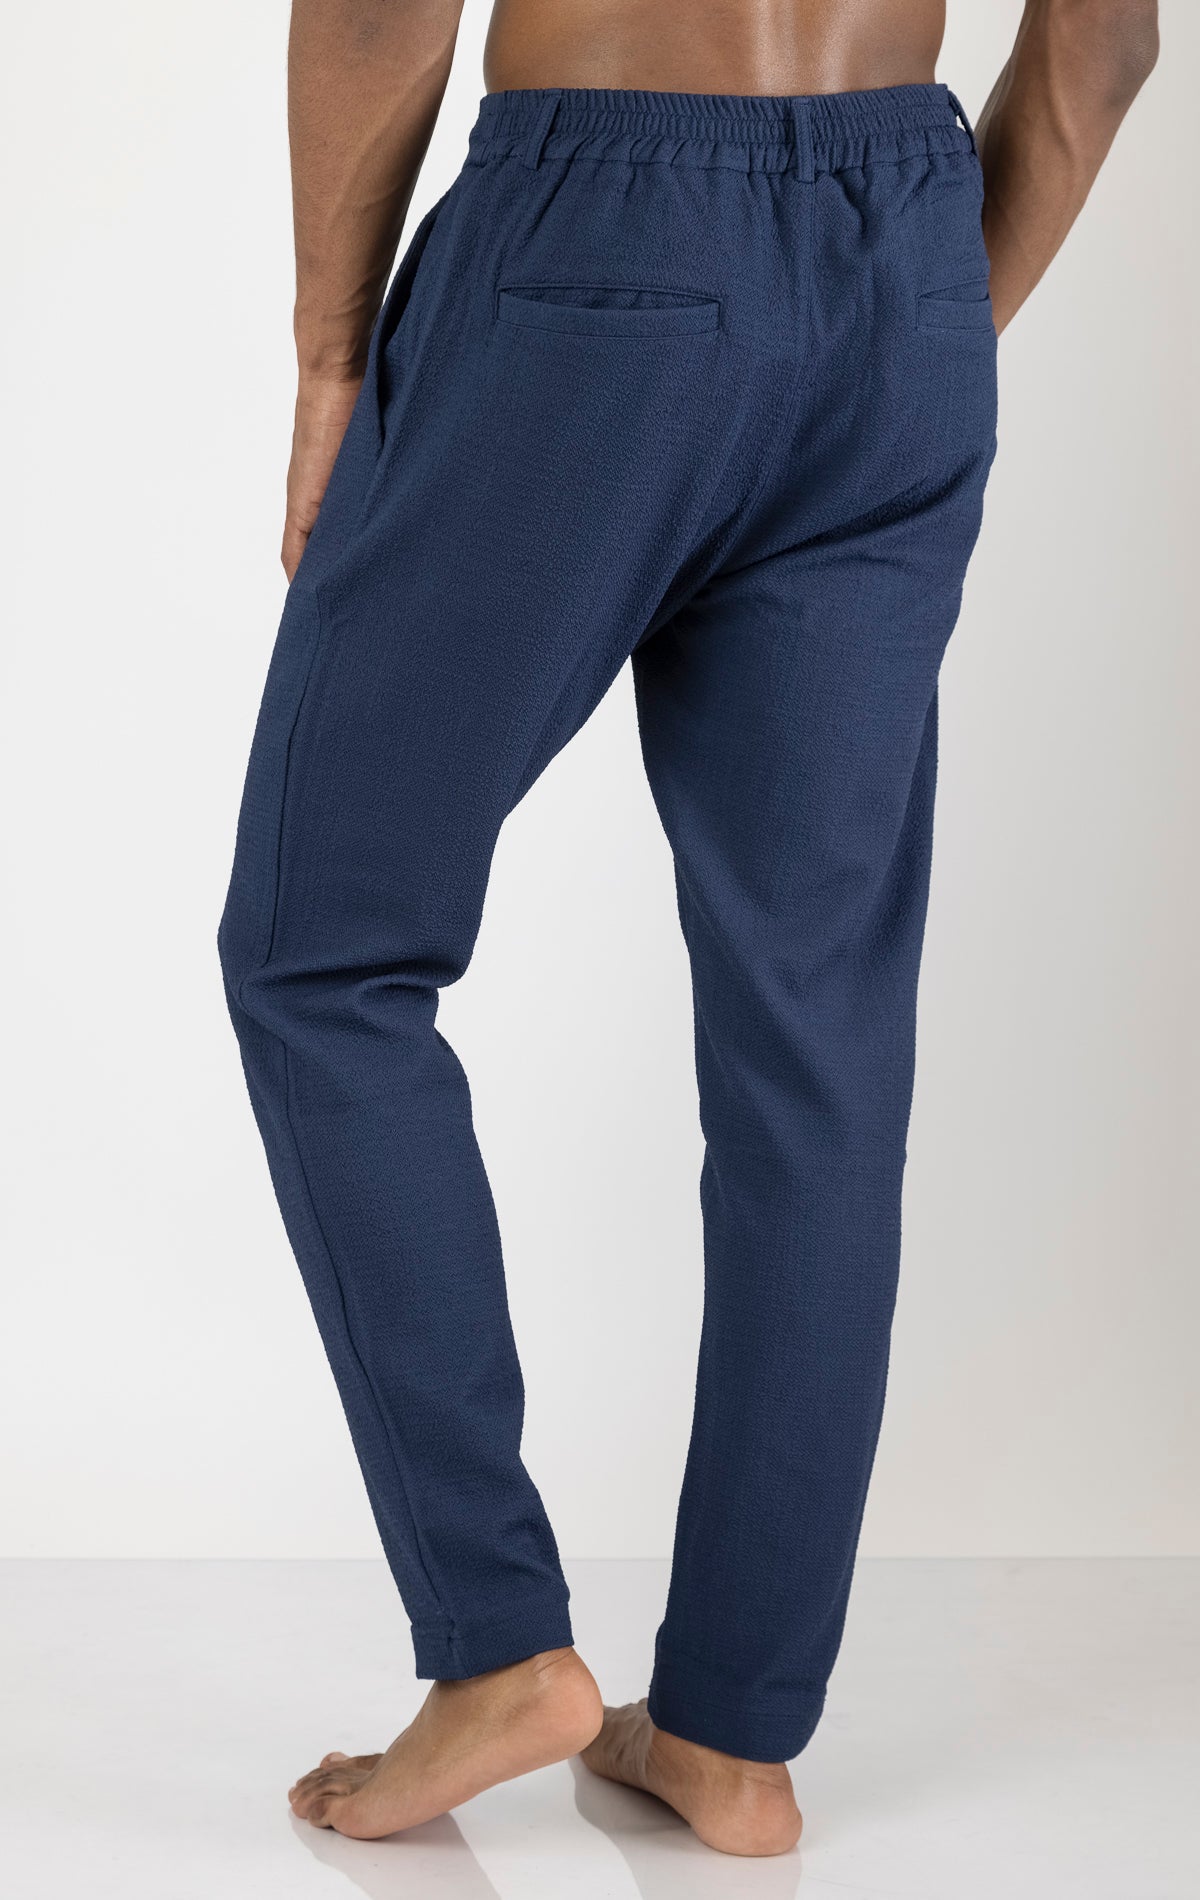 Men's front pleated waffle pants in navy. The pants are made from a textured waffle fabric (95% cotton, 5% elastane) and feature a relaxed fit, front pleats, and a comfortable elastic waistband.